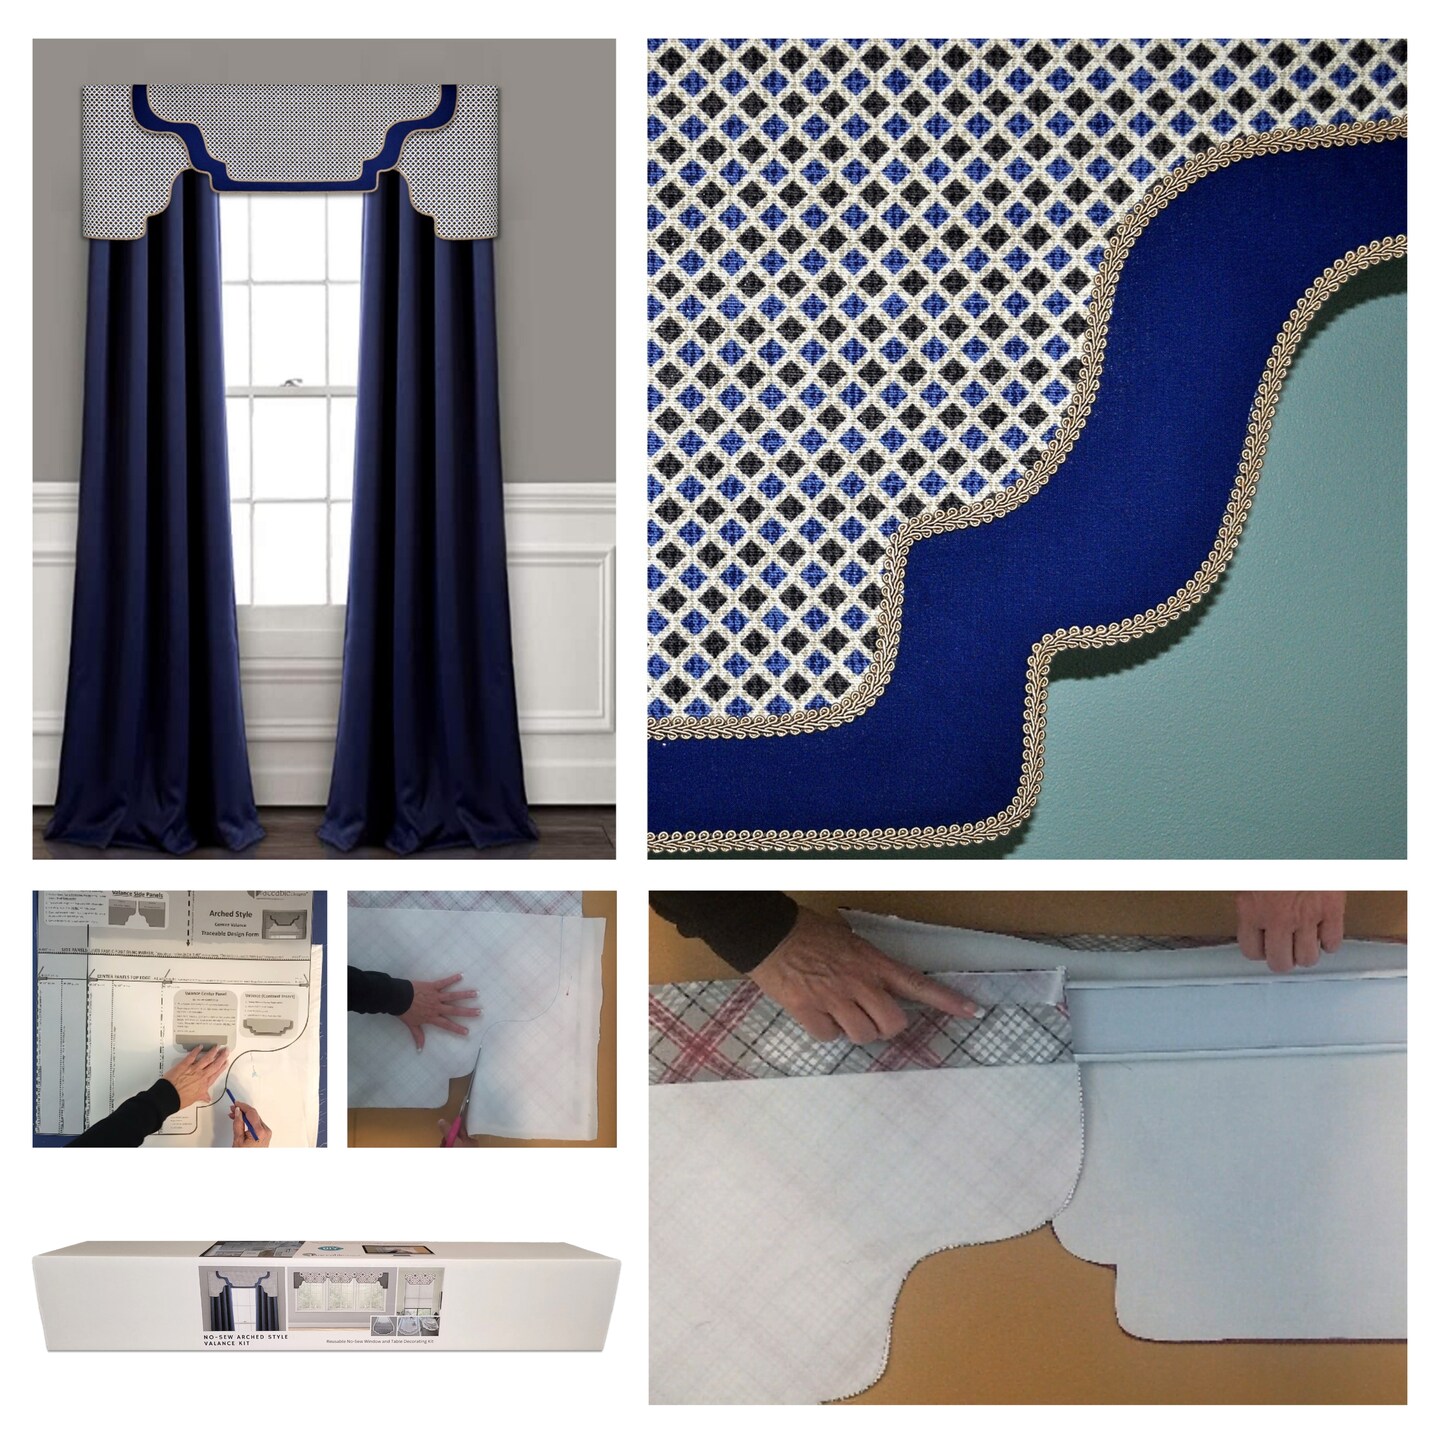 Arched-Style Cornice Valance Kit for DIY No-Sew Home Decor